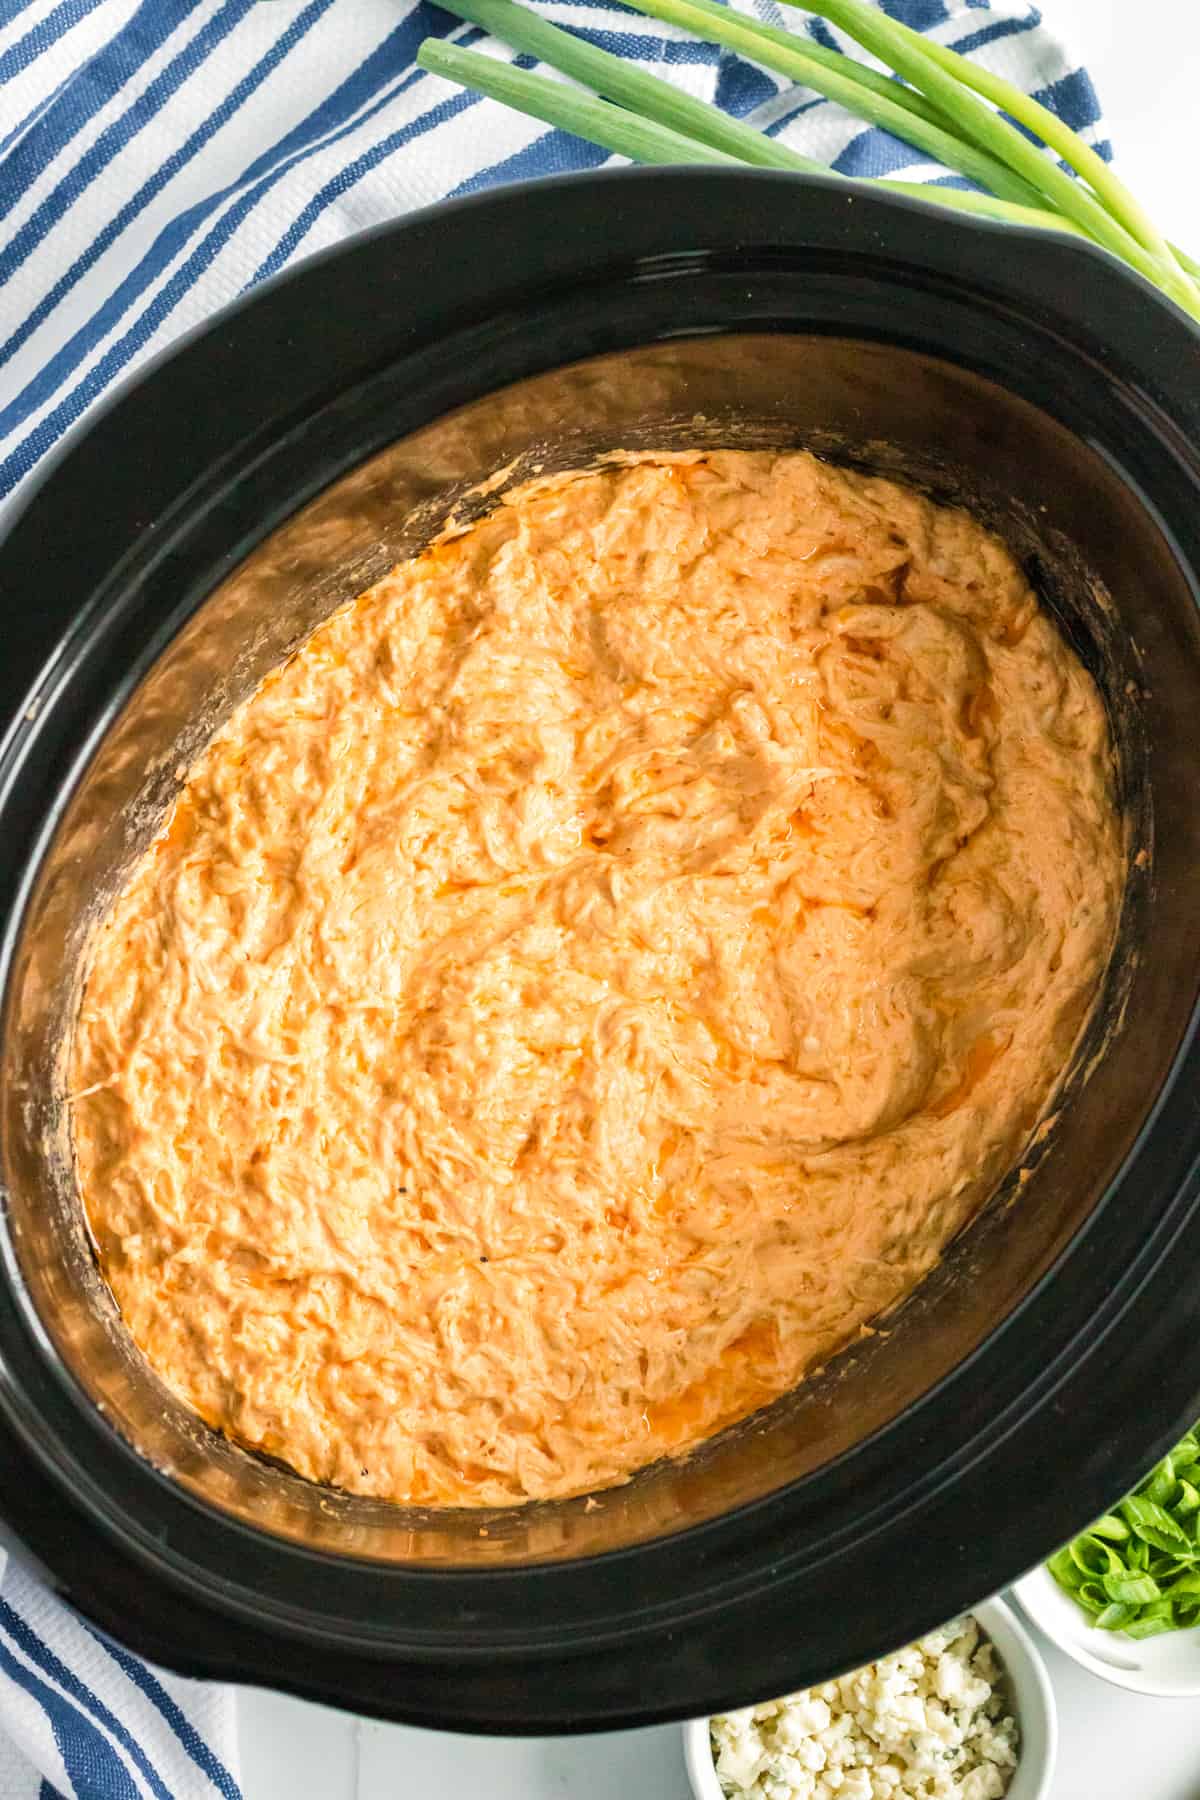 Buffalo chicken dip in the crockpot with green onions and crumbled blue cheese in the background.